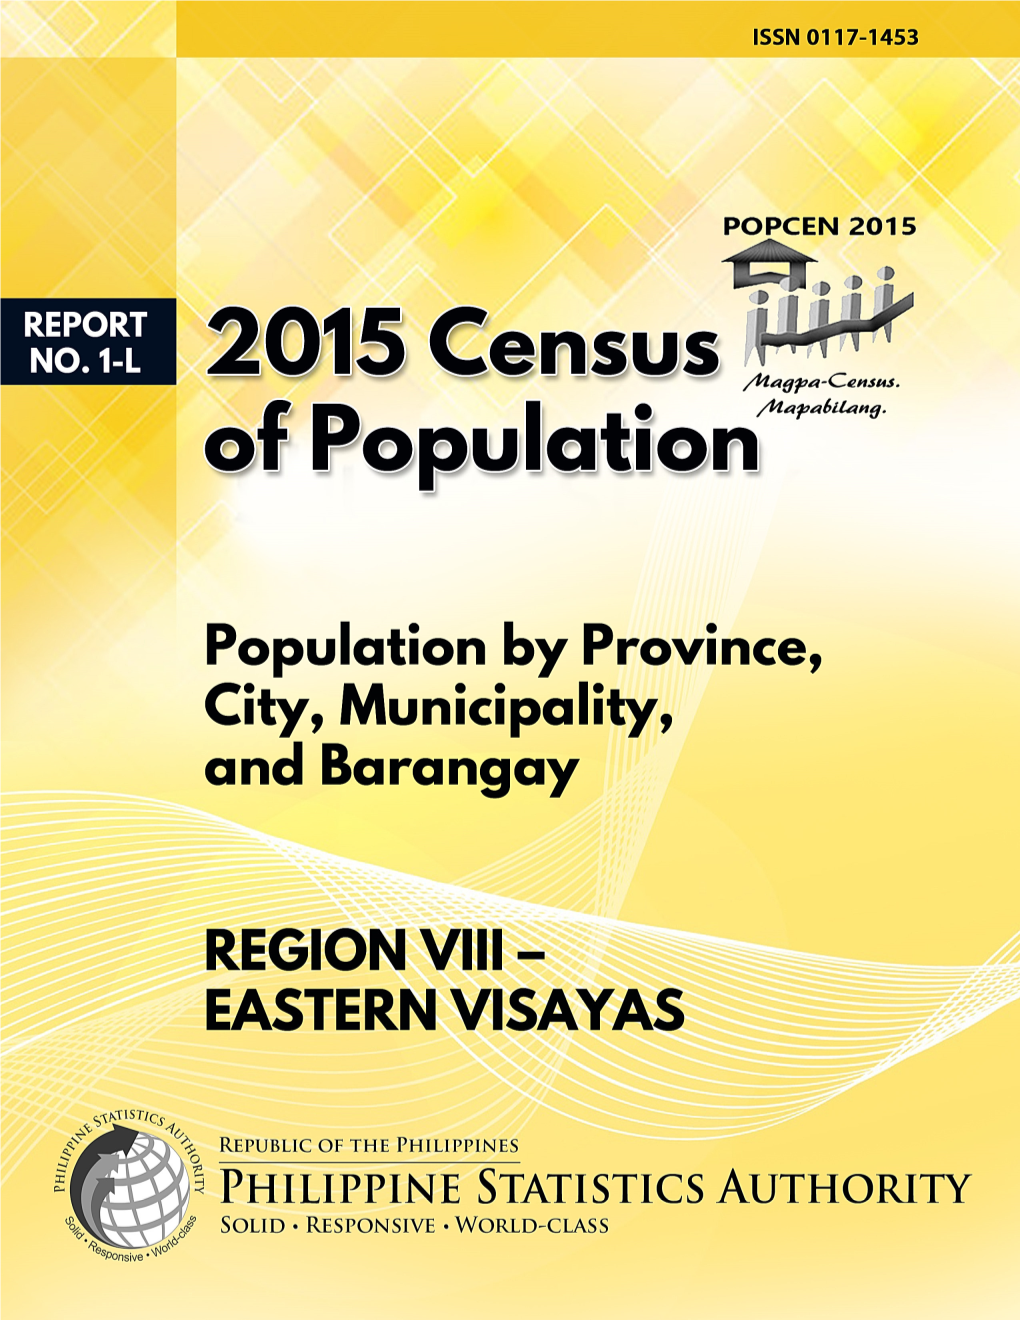 EASTERN VISAYAS Population by Province, City, Municipality, and Barangay August 2016